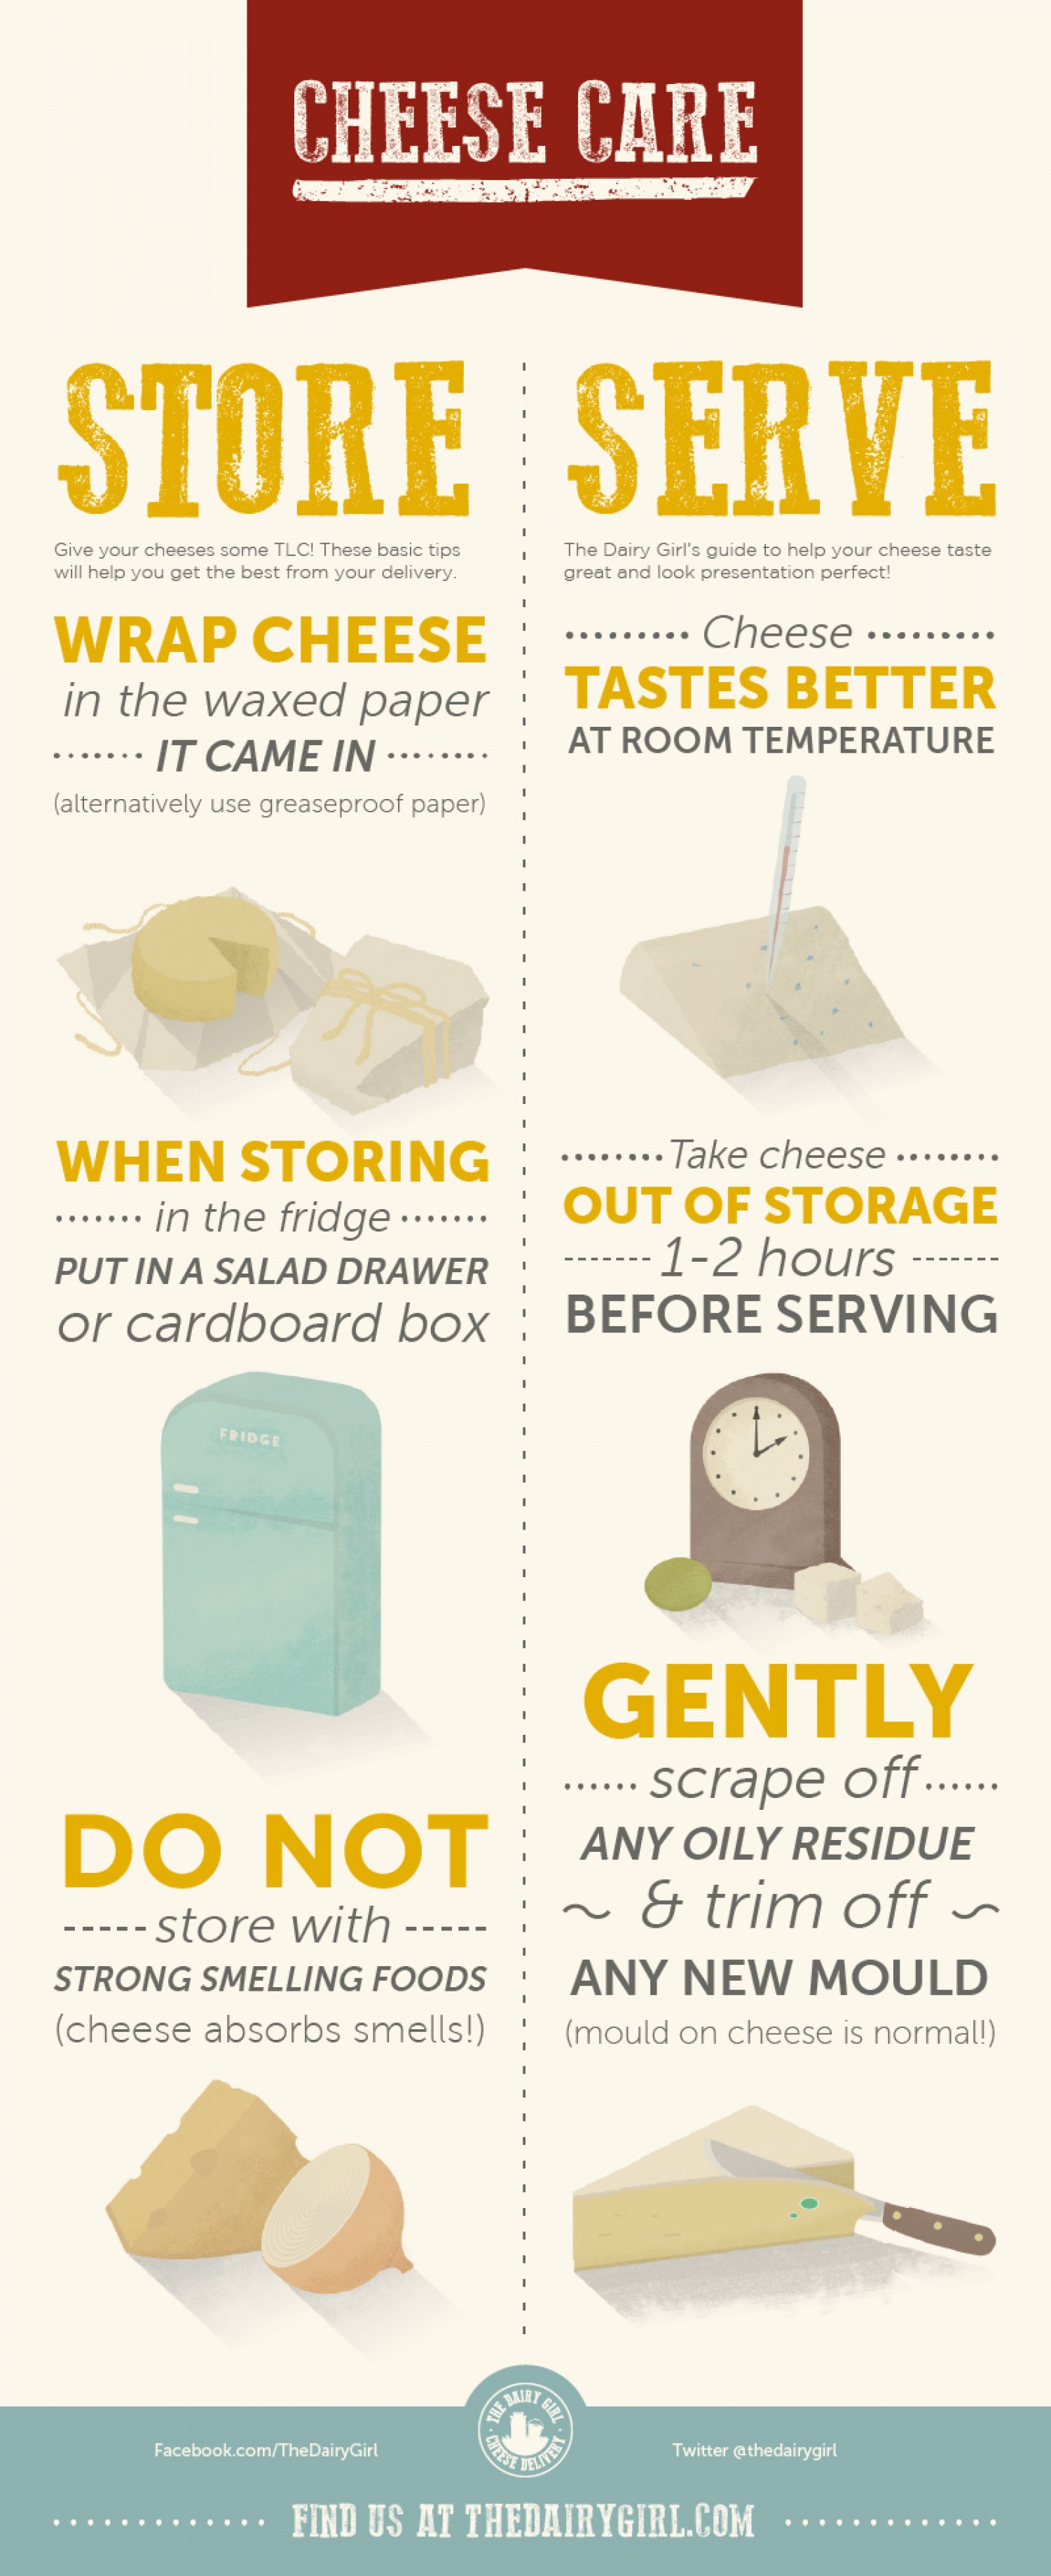 how to properly care for cheese